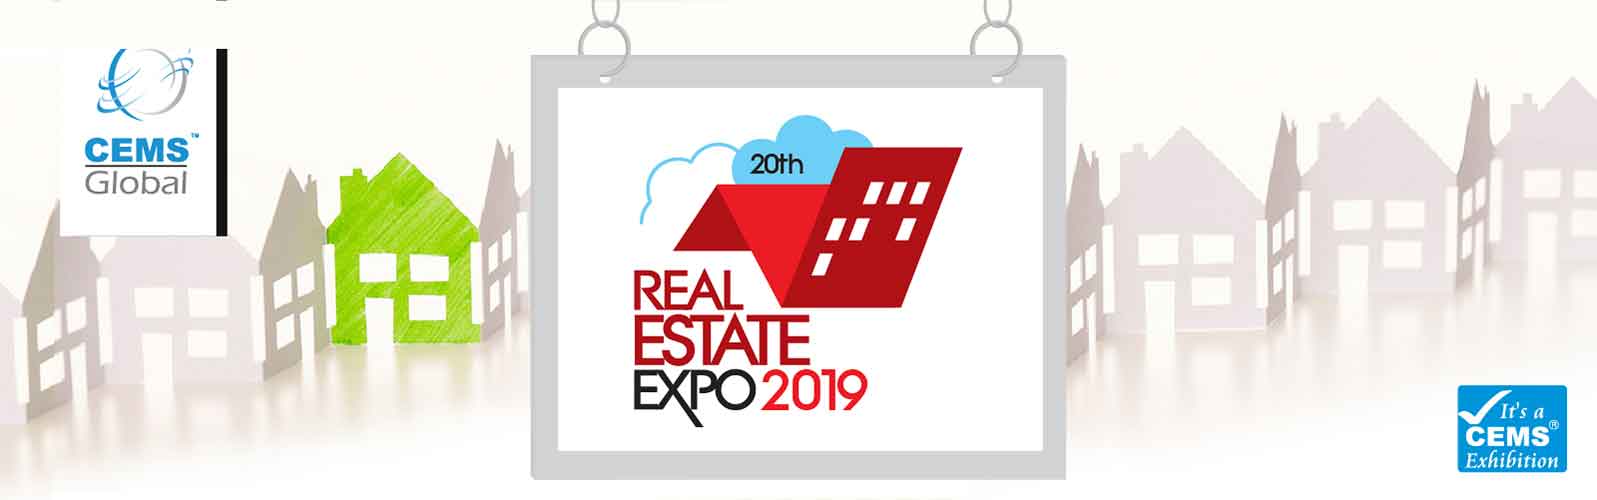  20th Real Estate Expo 2019